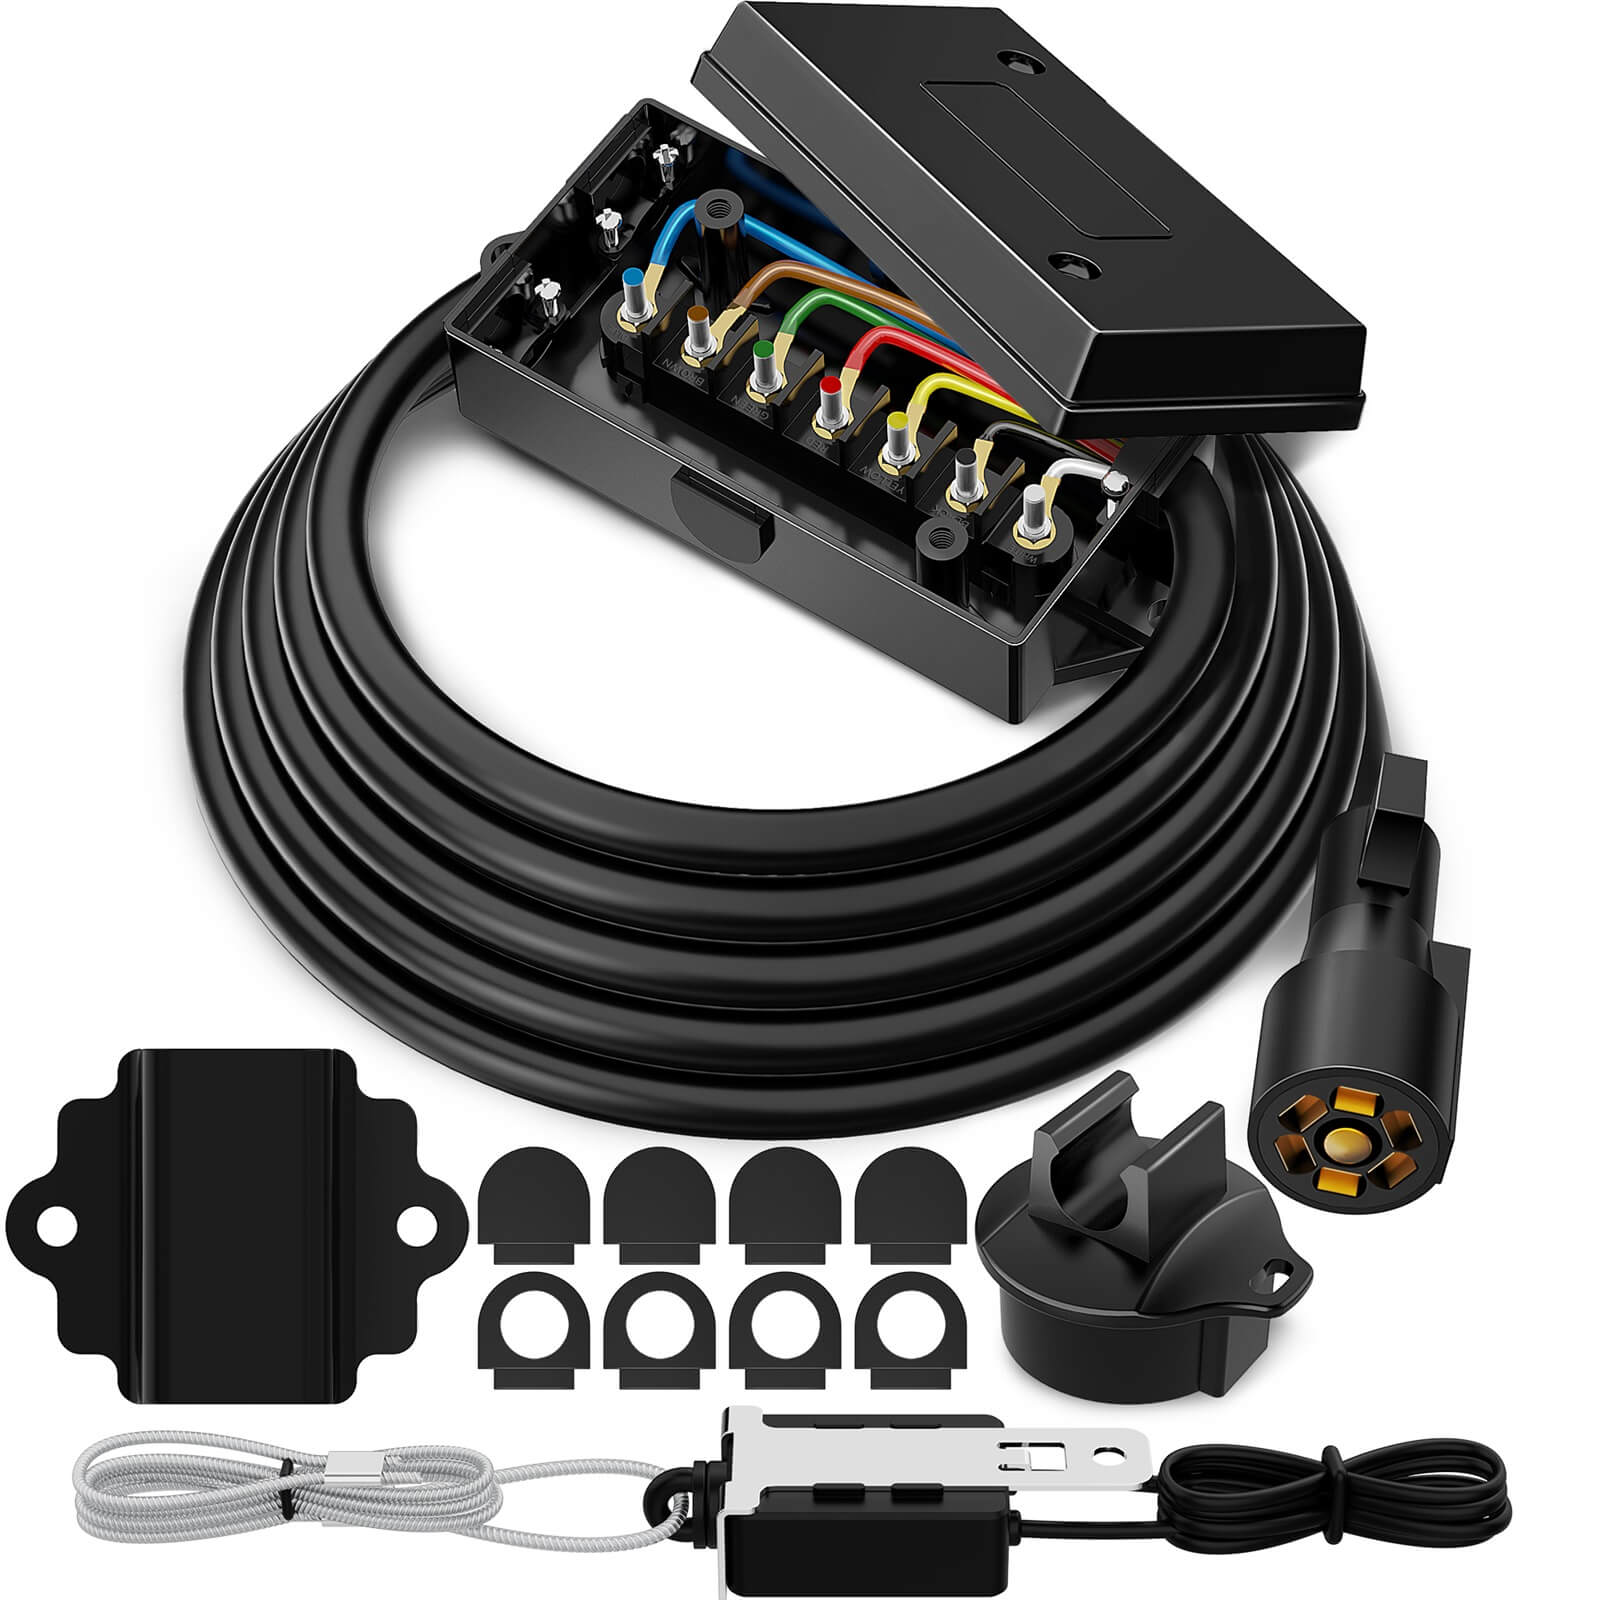 8 FT Black Heavy Duty 7 Way Plug Inline Trailer Cord with 7 Gang Junction Box,12V Breakaway Switch and Plug Holder